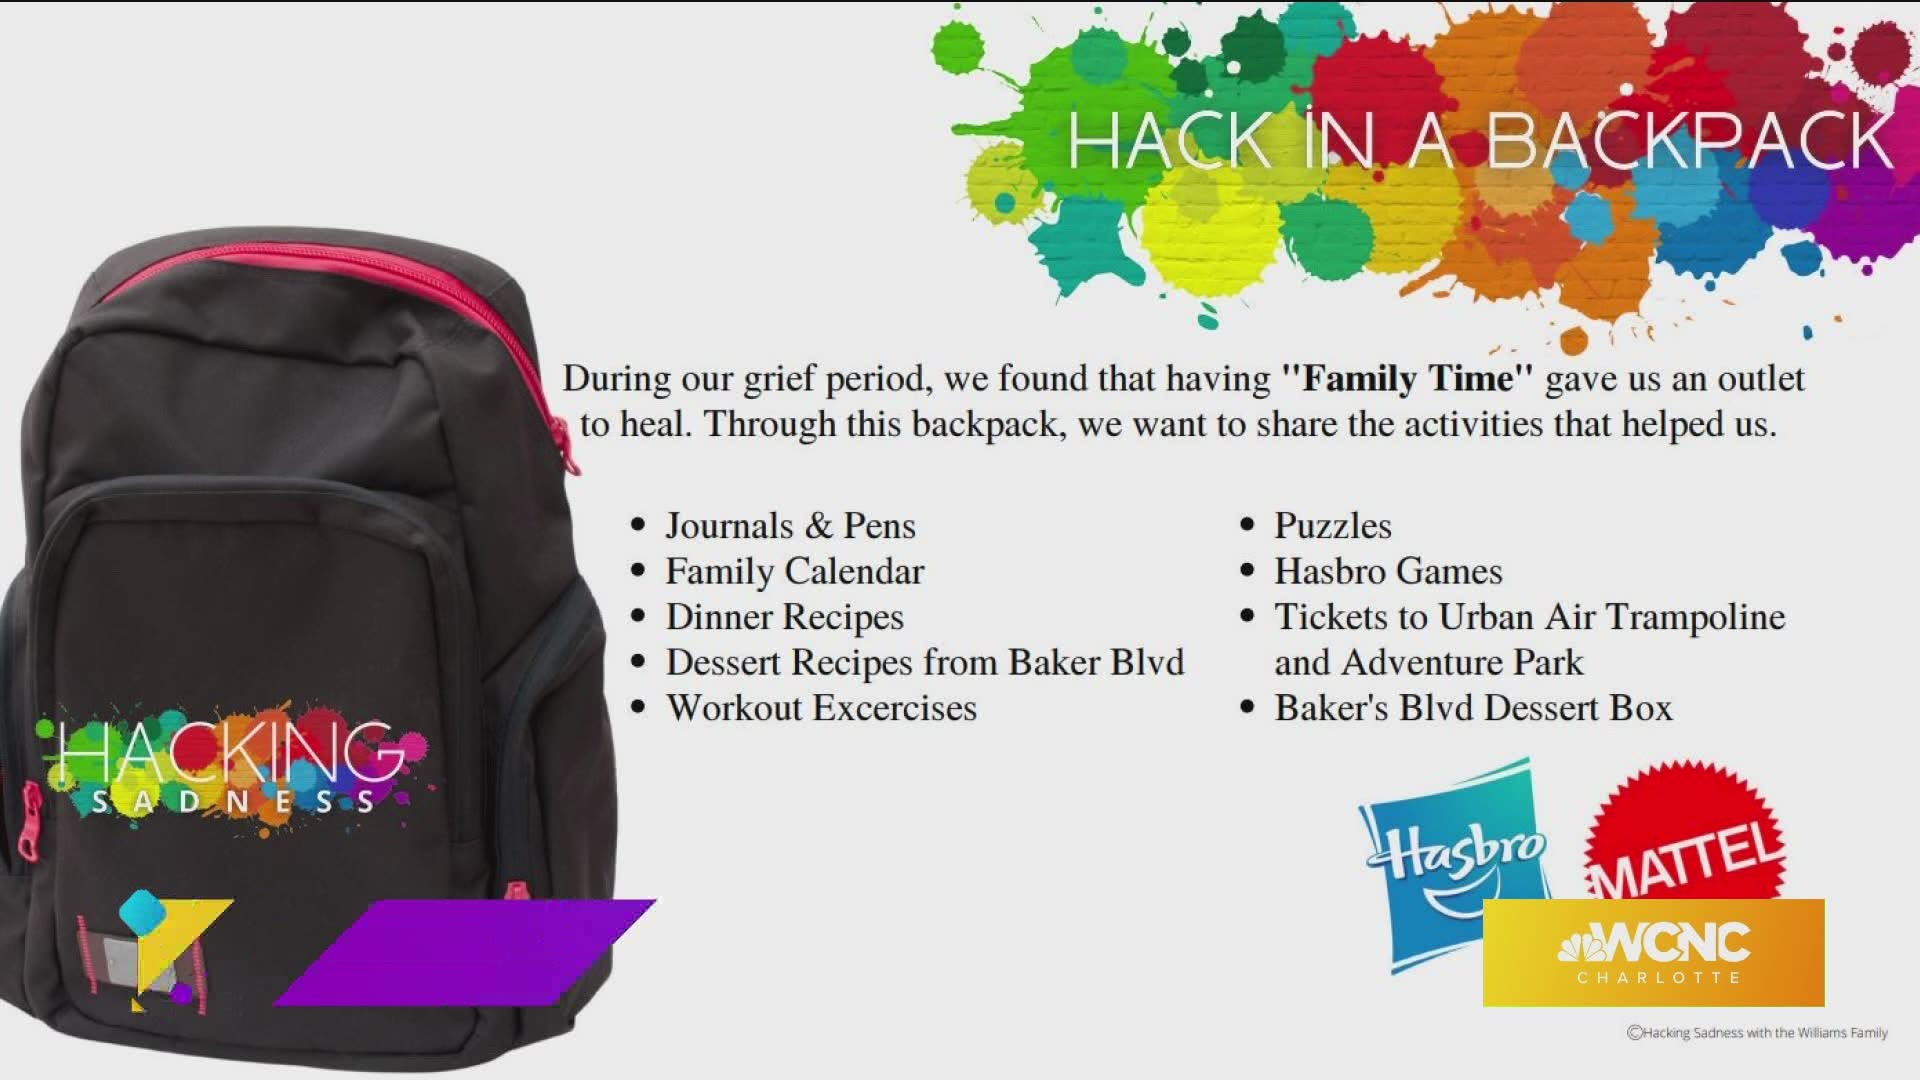 Hacks to help families overcome grief